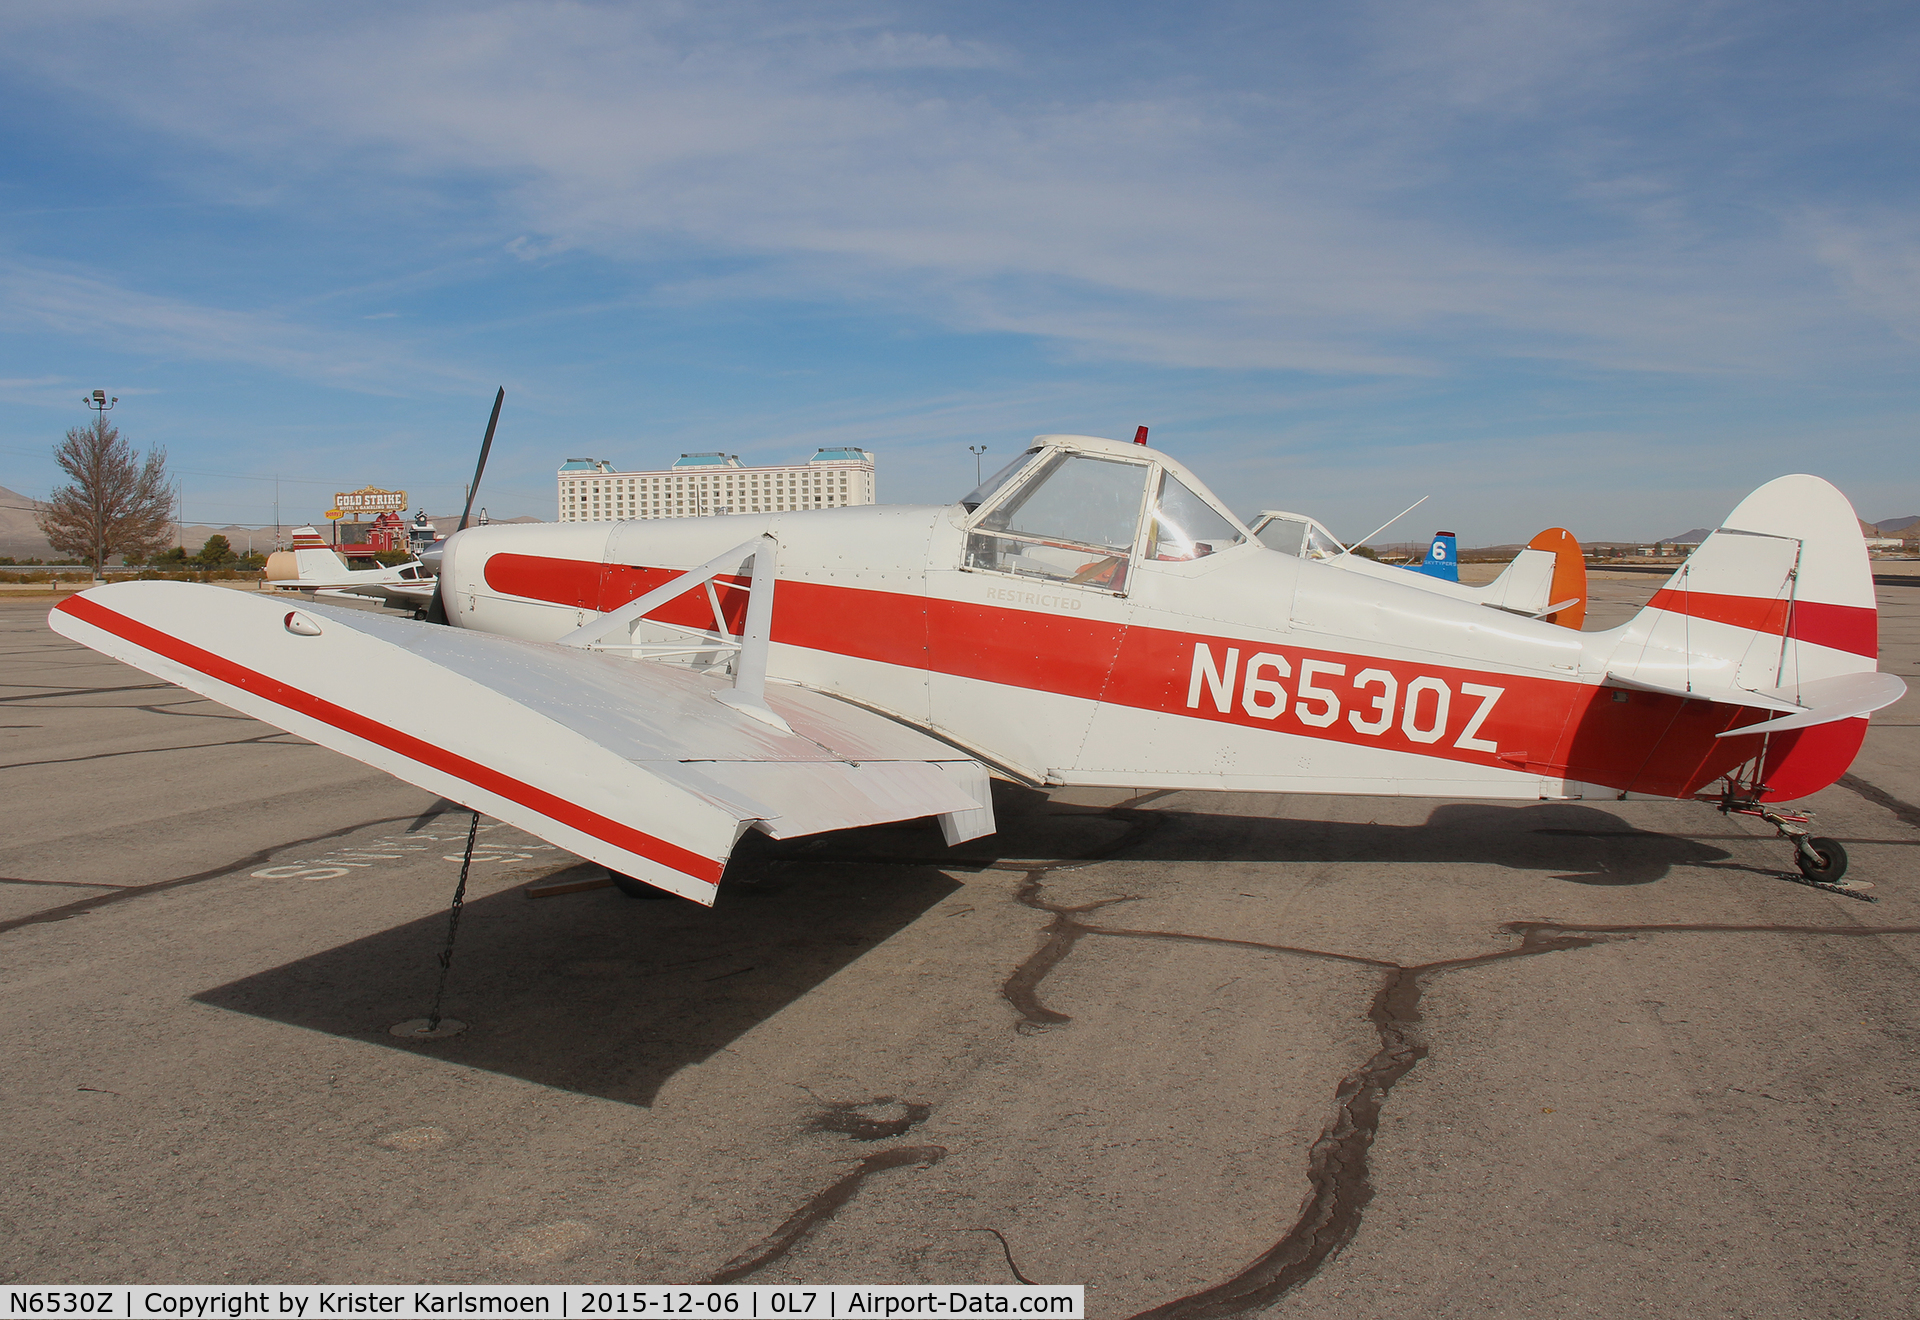 N6530Z, 1962 Piper PA-25-235 C/N 25-2063, Parked at Jean NV. Sold from Durango Colorado?